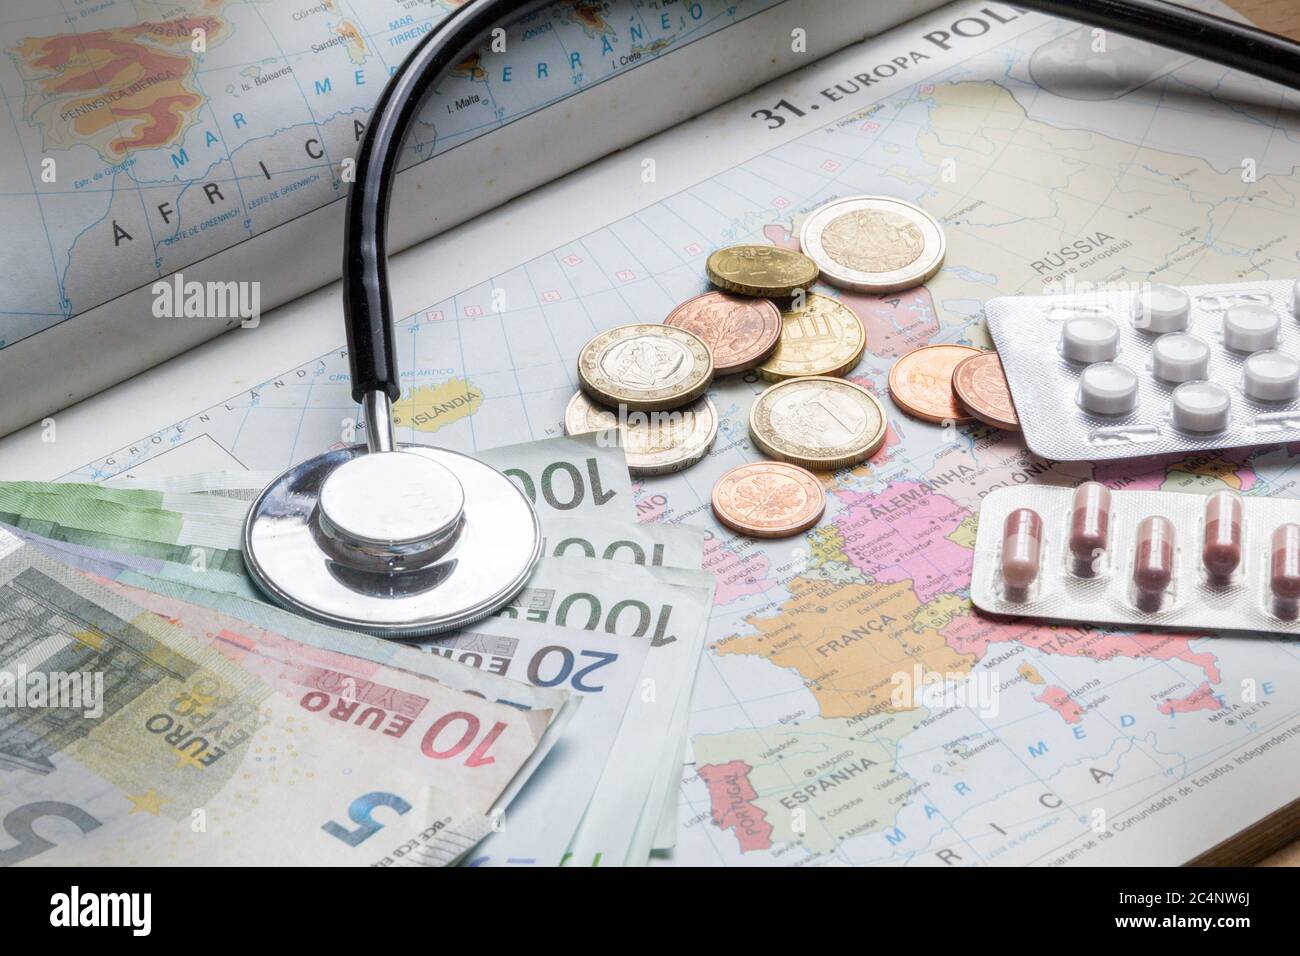 concept of health care insurance contract Stock Photo